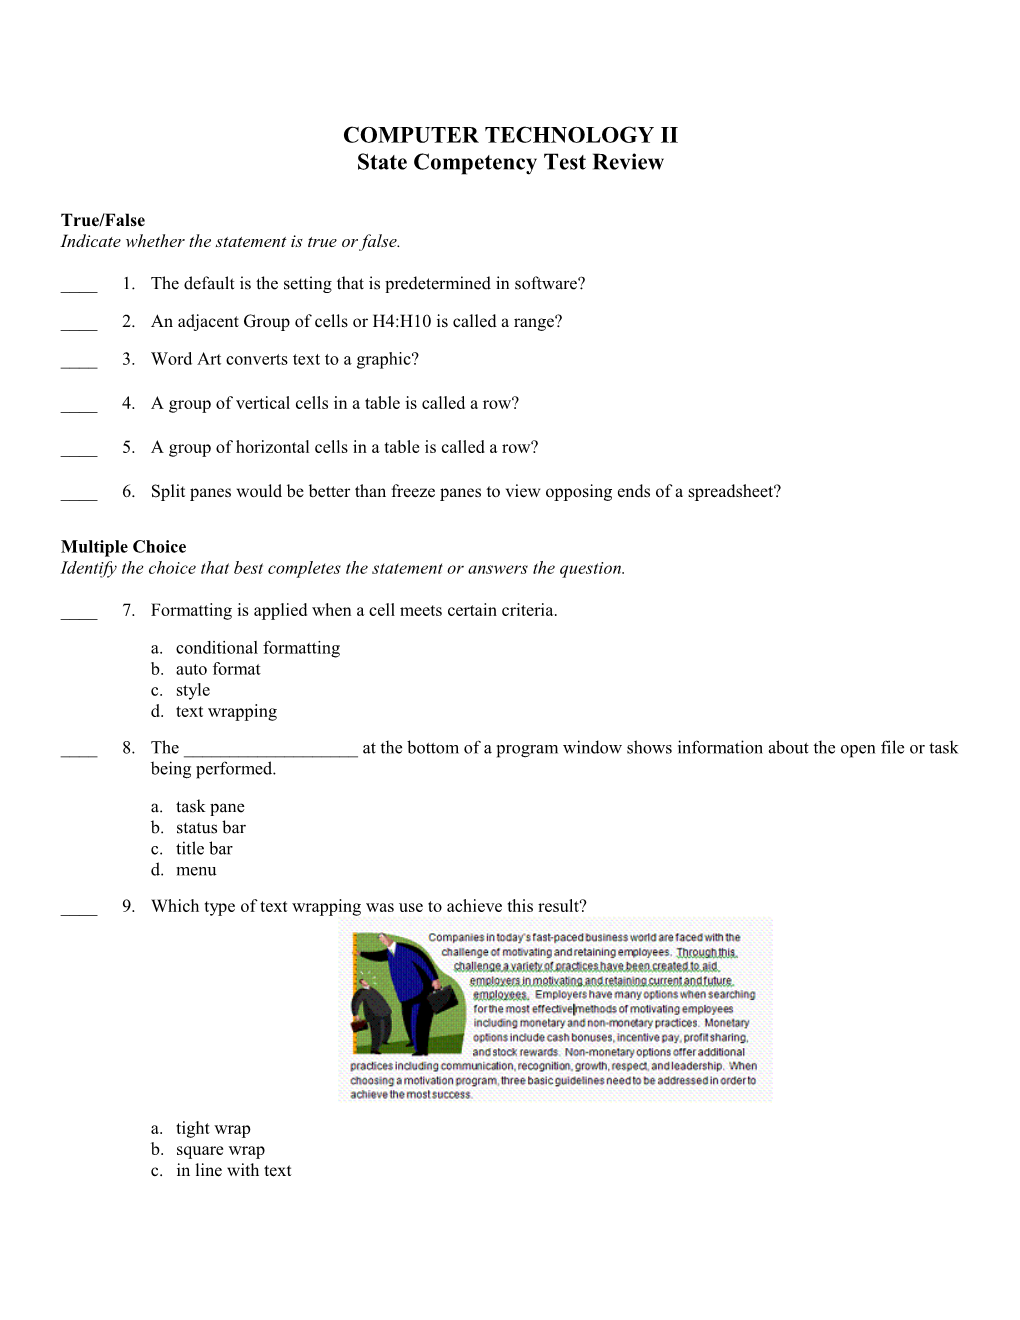 State Competency Test Review